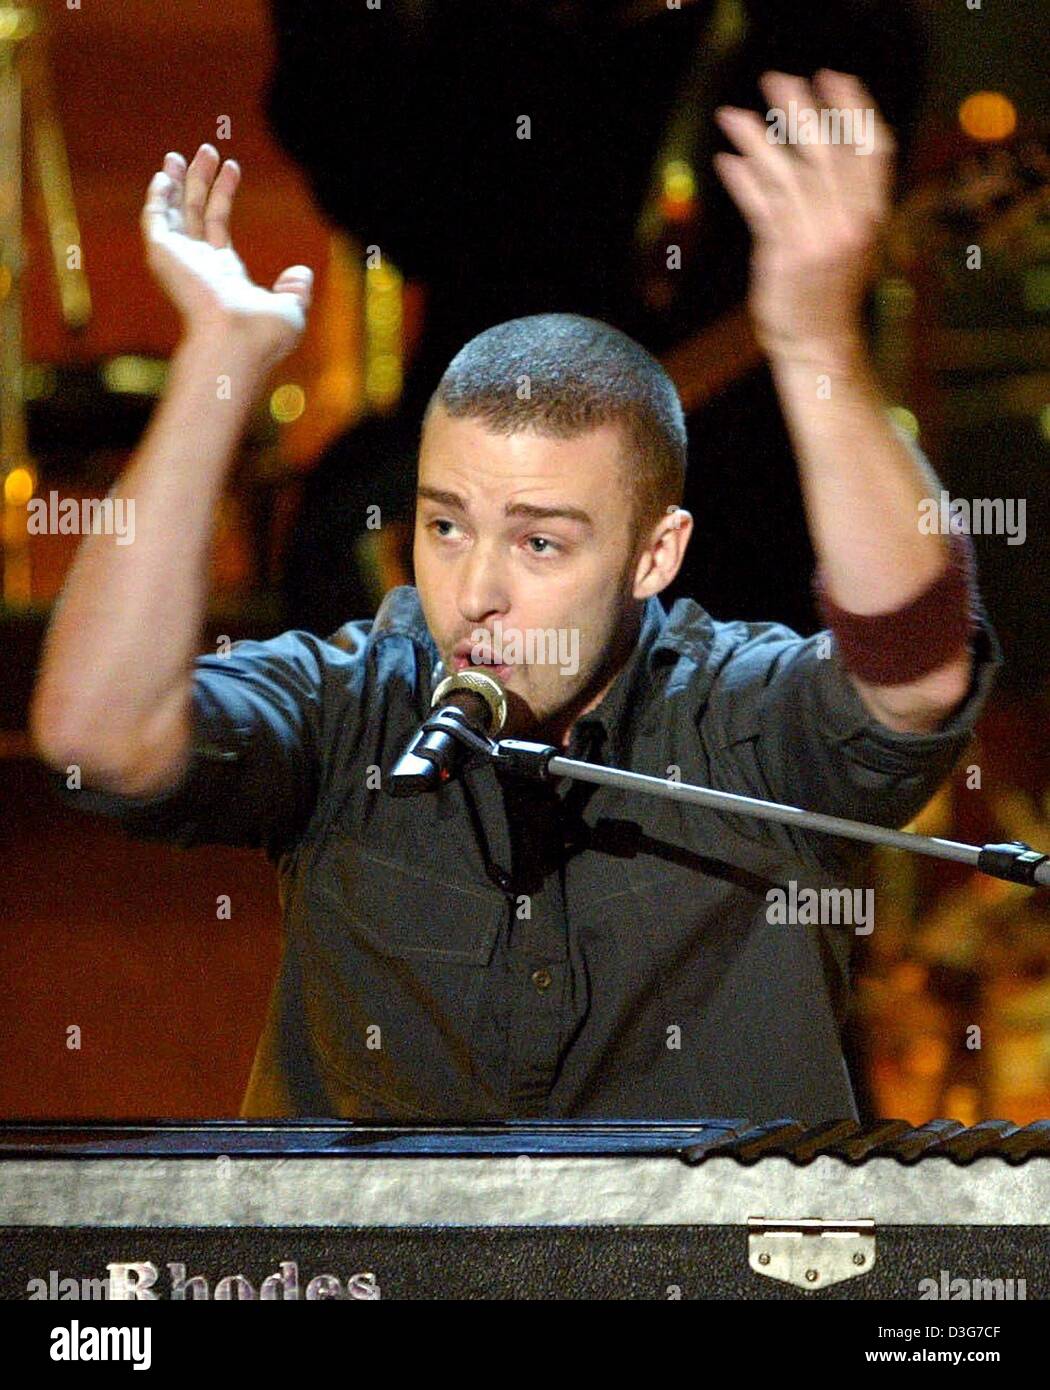 dpa) - US pop singer Justin Timberlake performs his song 'Senorita' during  the live television show 'Wetten, dass...?' (bet, that...) in Graz,  Austria, 8 November 2003 Stock Photo - Alamy